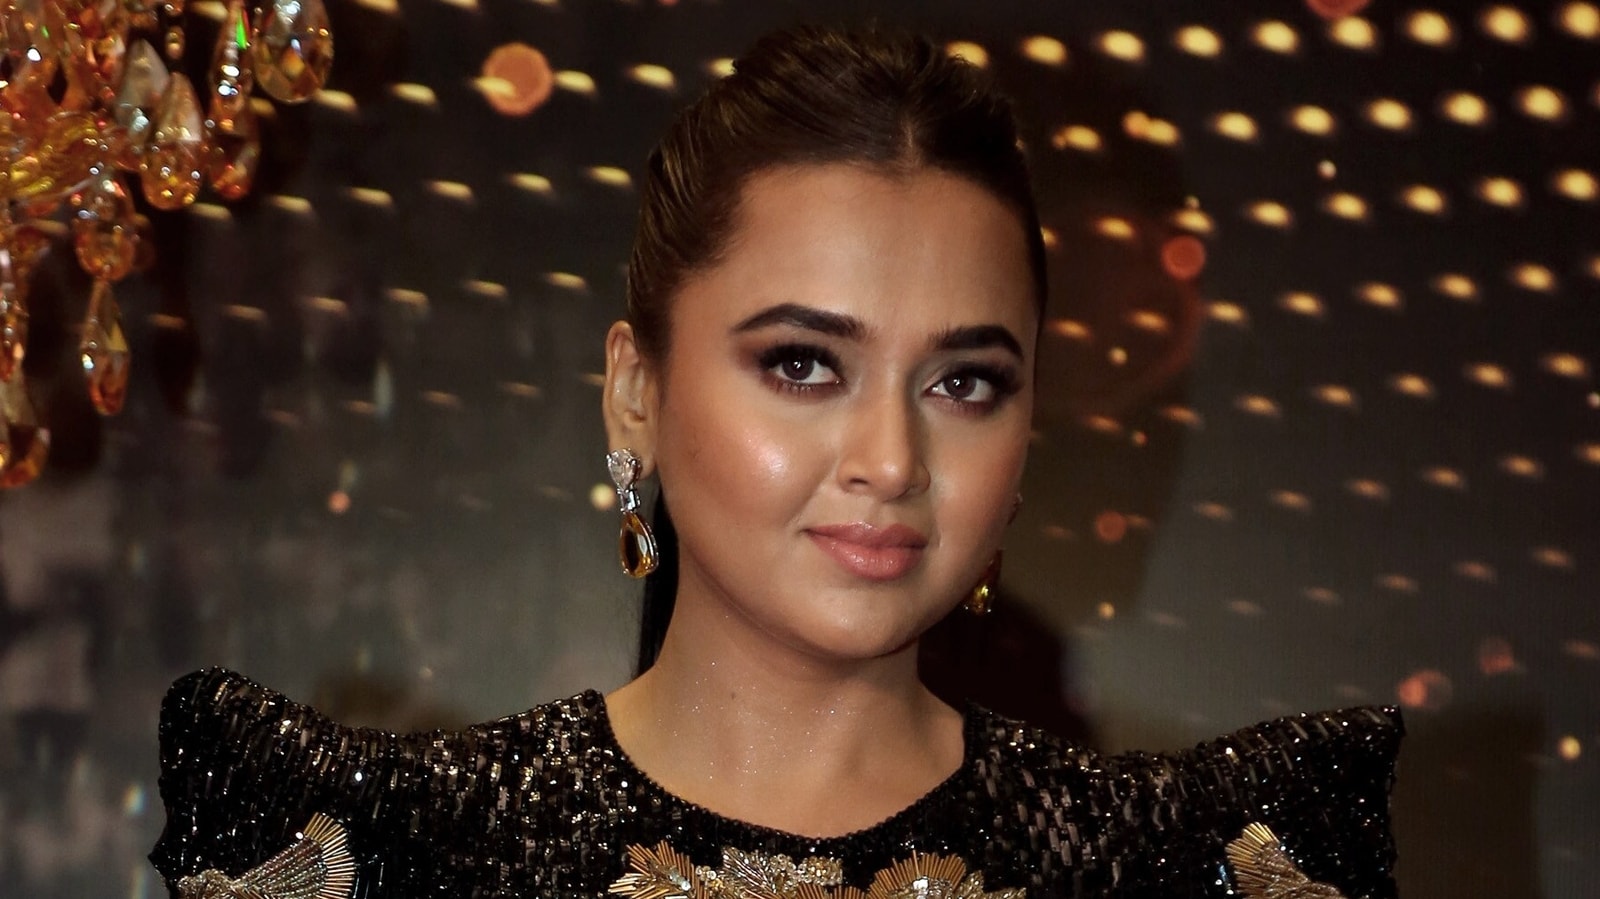 Tejasswi Prakash says women relying on men for investments is ‘stupid’